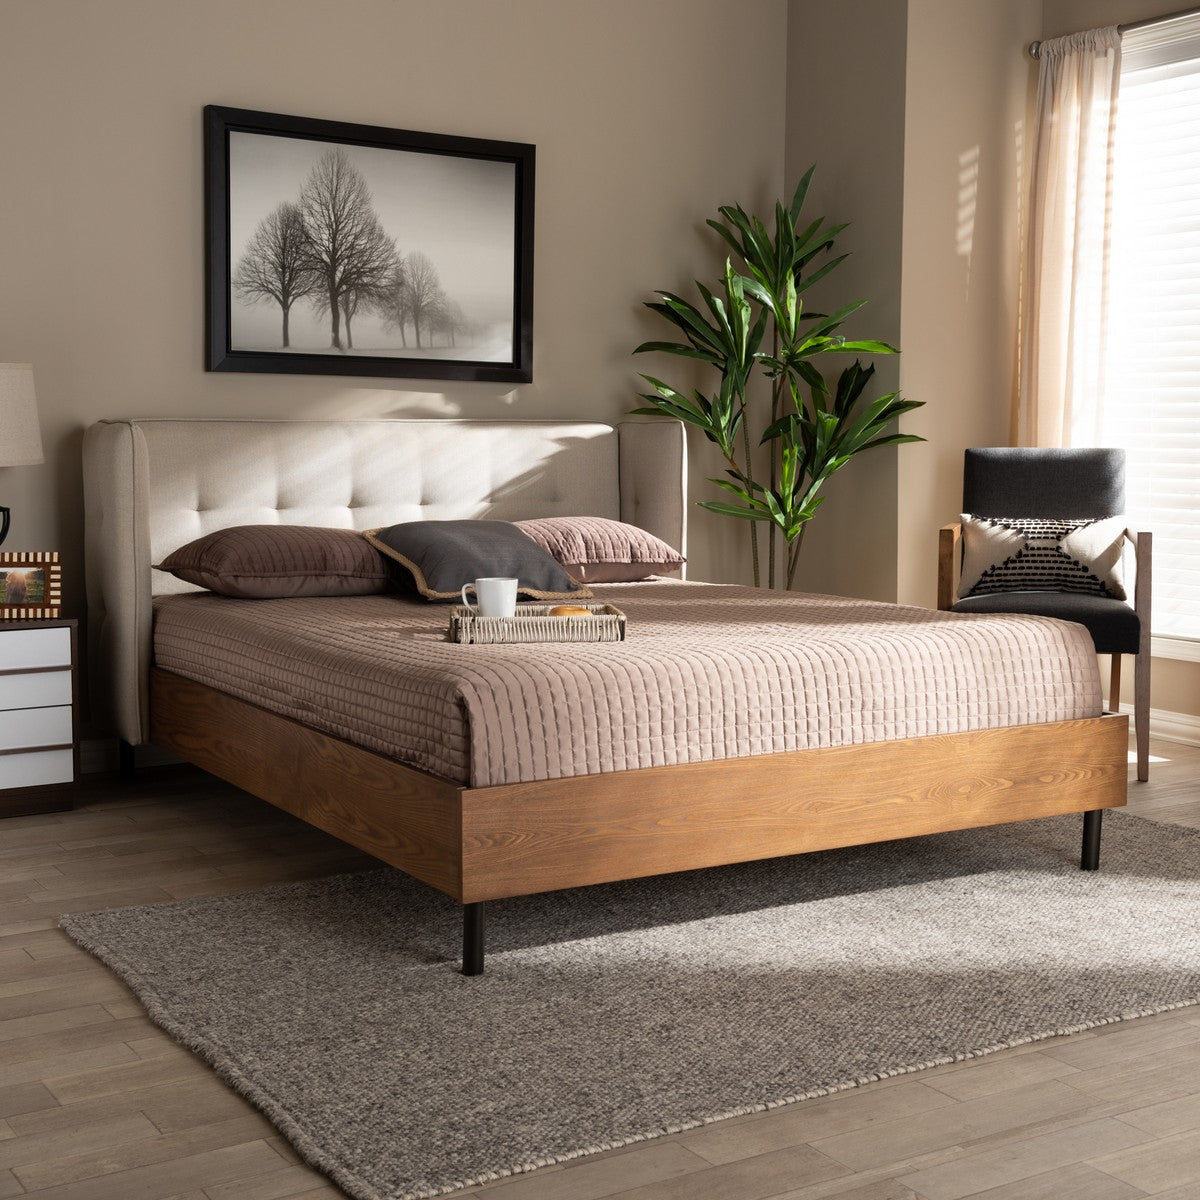 Baxton Studio Catarina Mid-Century Modern Light Beige Fabric Upholstered Walnut Finished Wood Queen Size Wingback Platform Bed